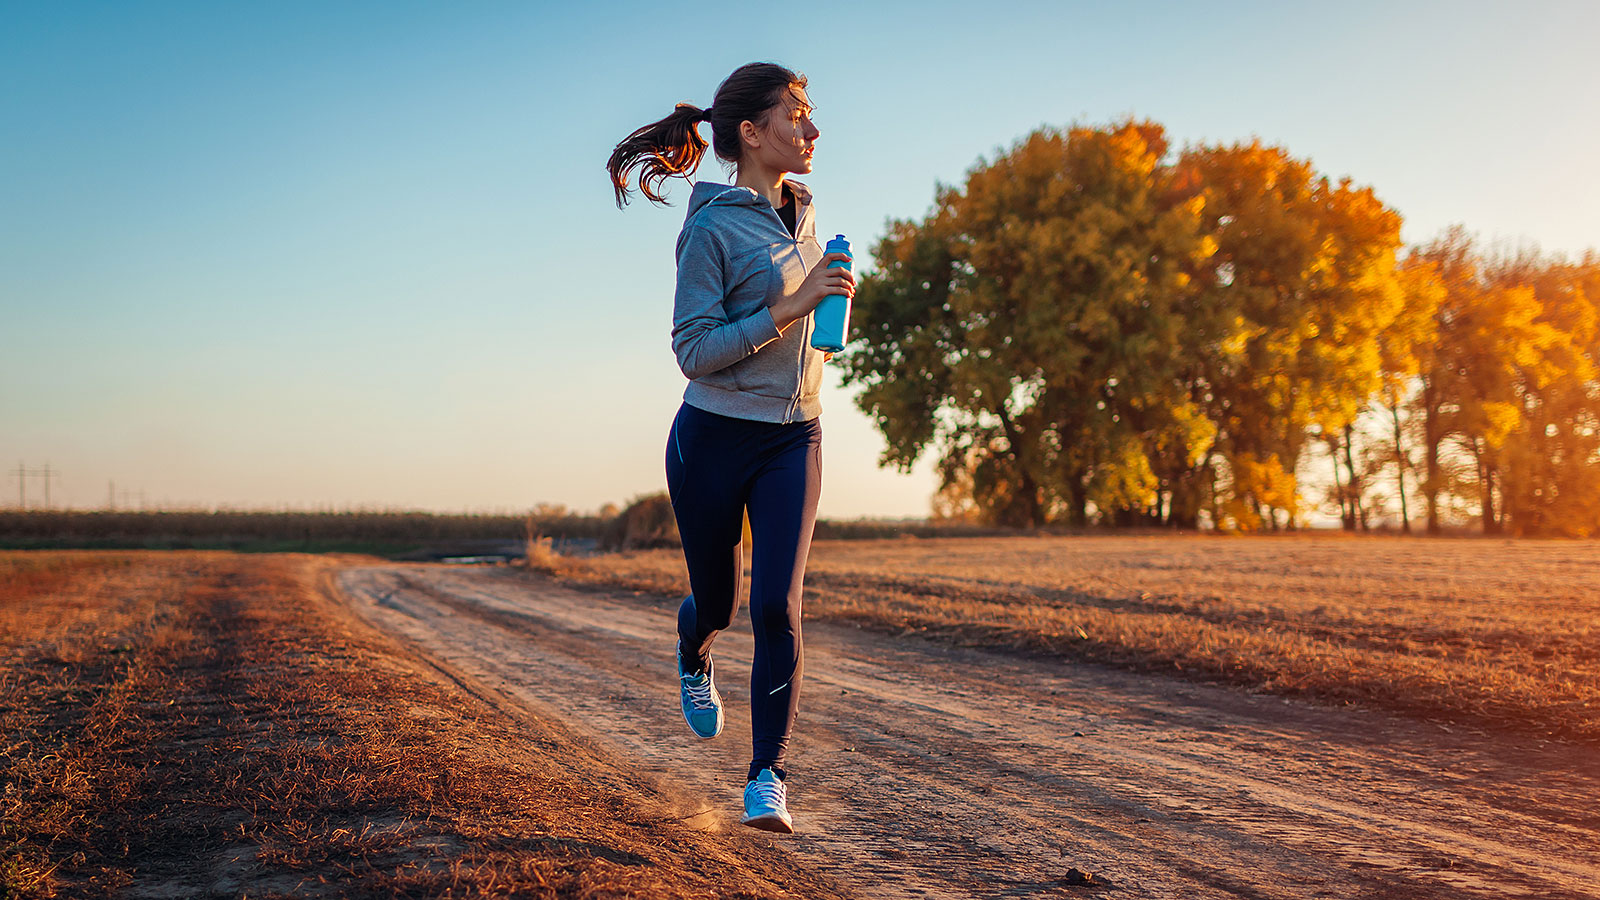 Long Distance Running Is An Example Of What Type Of Exercise